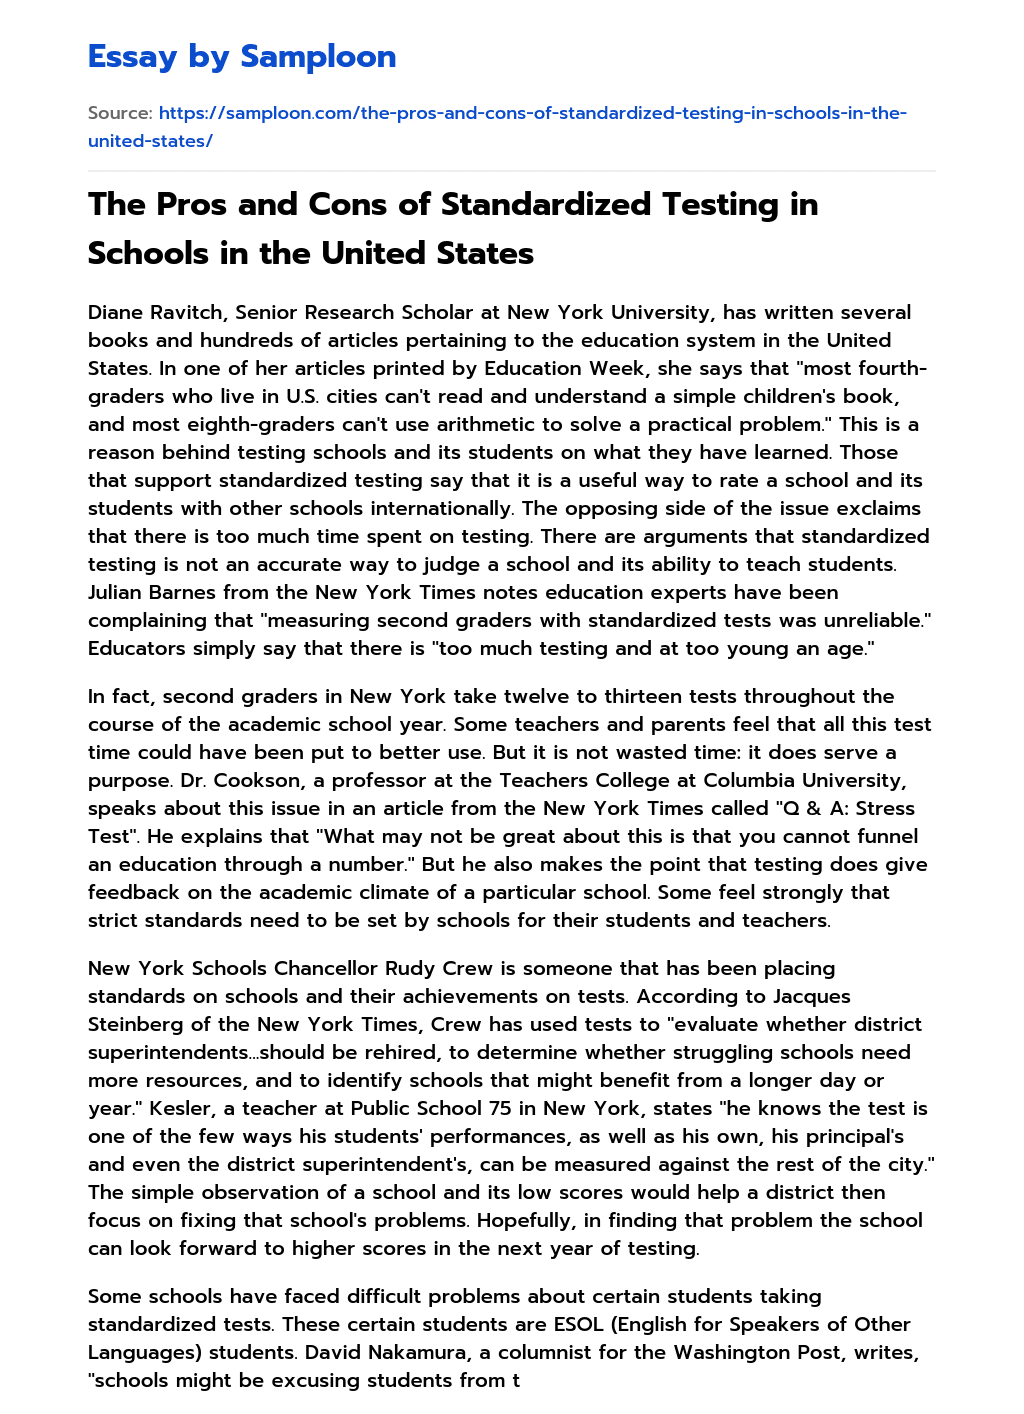 The Pros and Cons of Standardized Testing in Schools in the United States essay